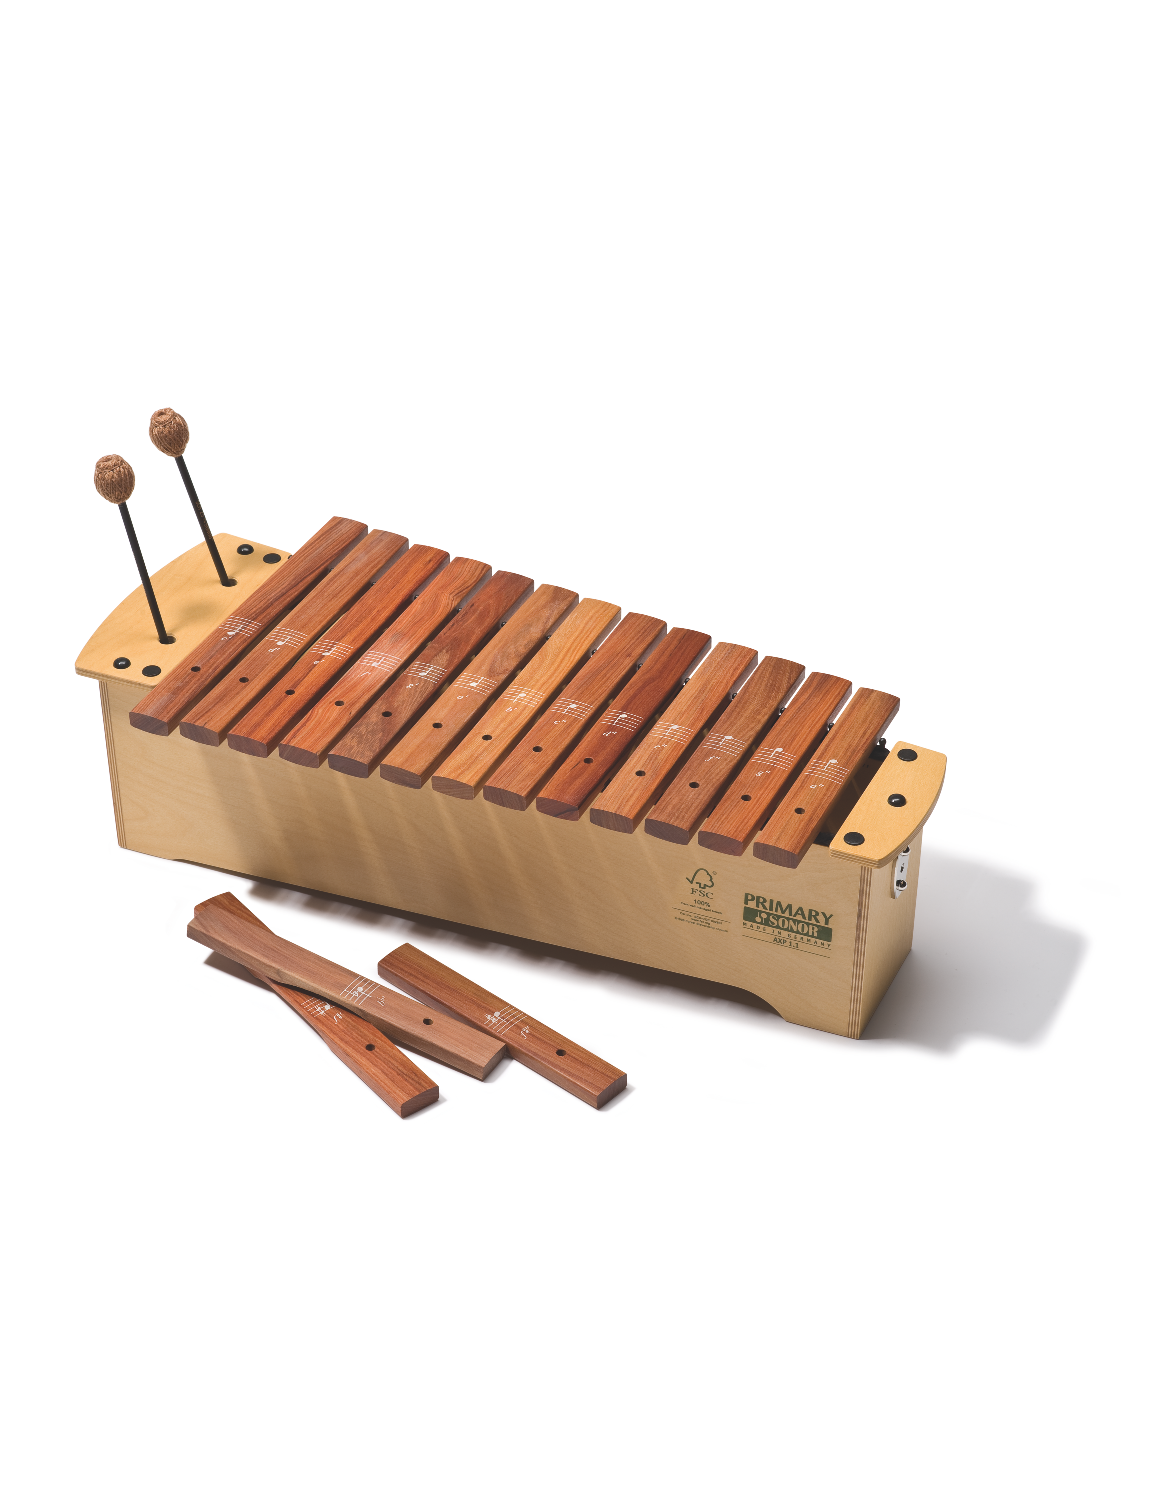 Orff 6 instrument bundle: Early Childhood/Primary series Bundle -P.O.P.